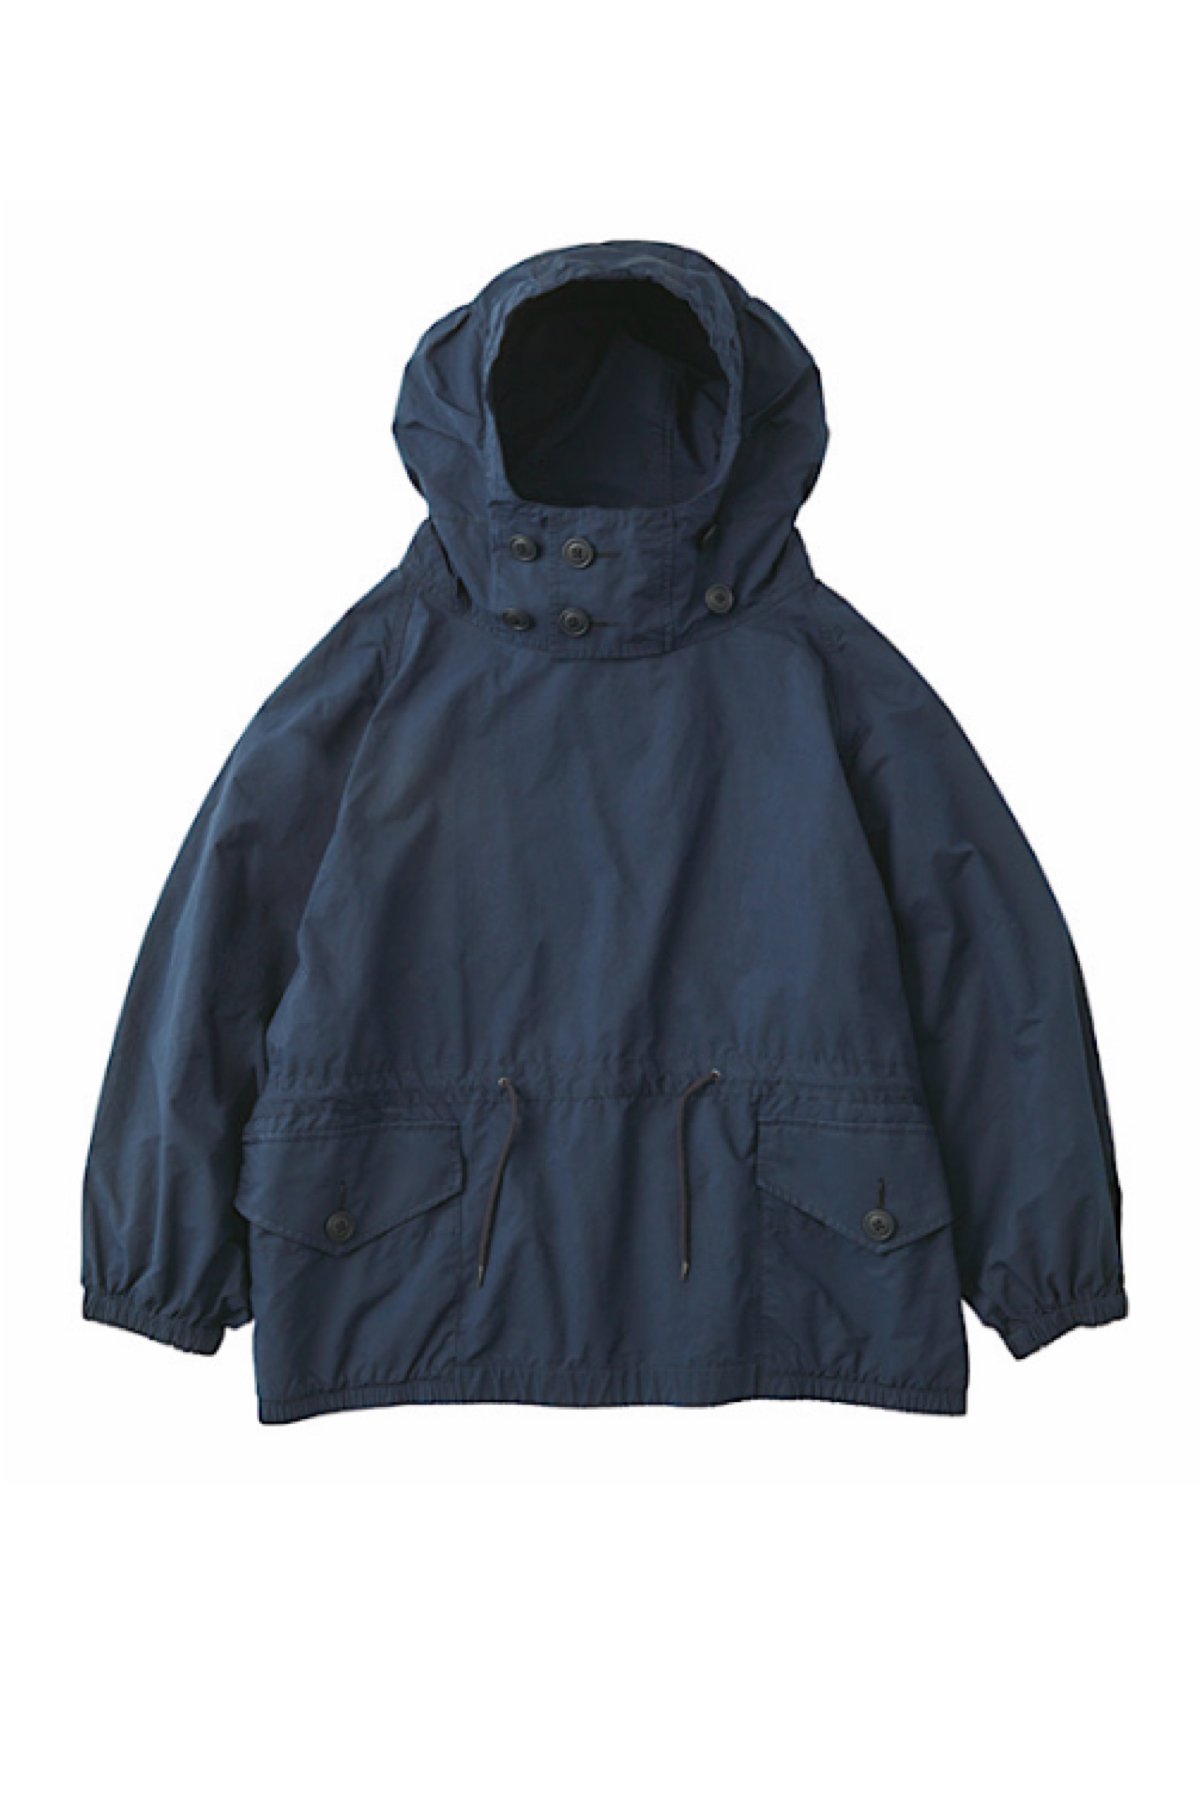 Porter Classic - FLOCKY SWEAT PARKA - RED ポータークラシック 